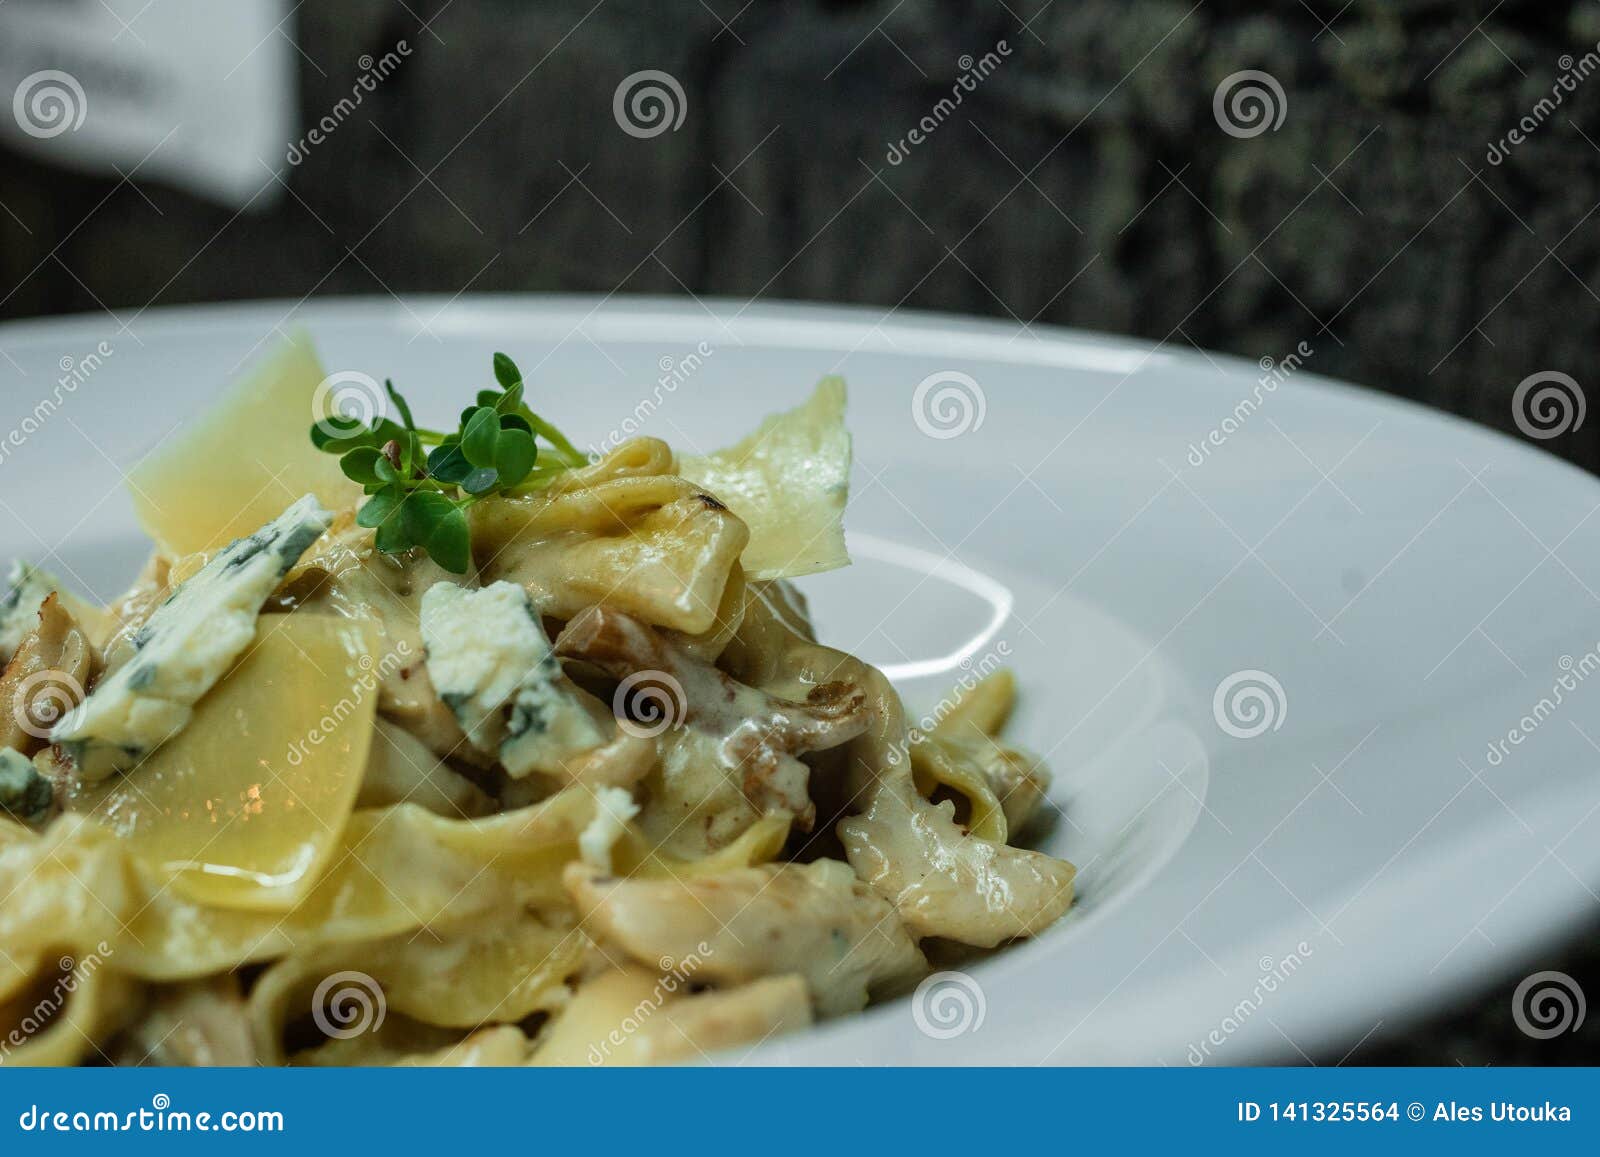 tasty hot noodle with cream sauce with fried mushrooms and roquefort cheese in a bar on a brick wall background.